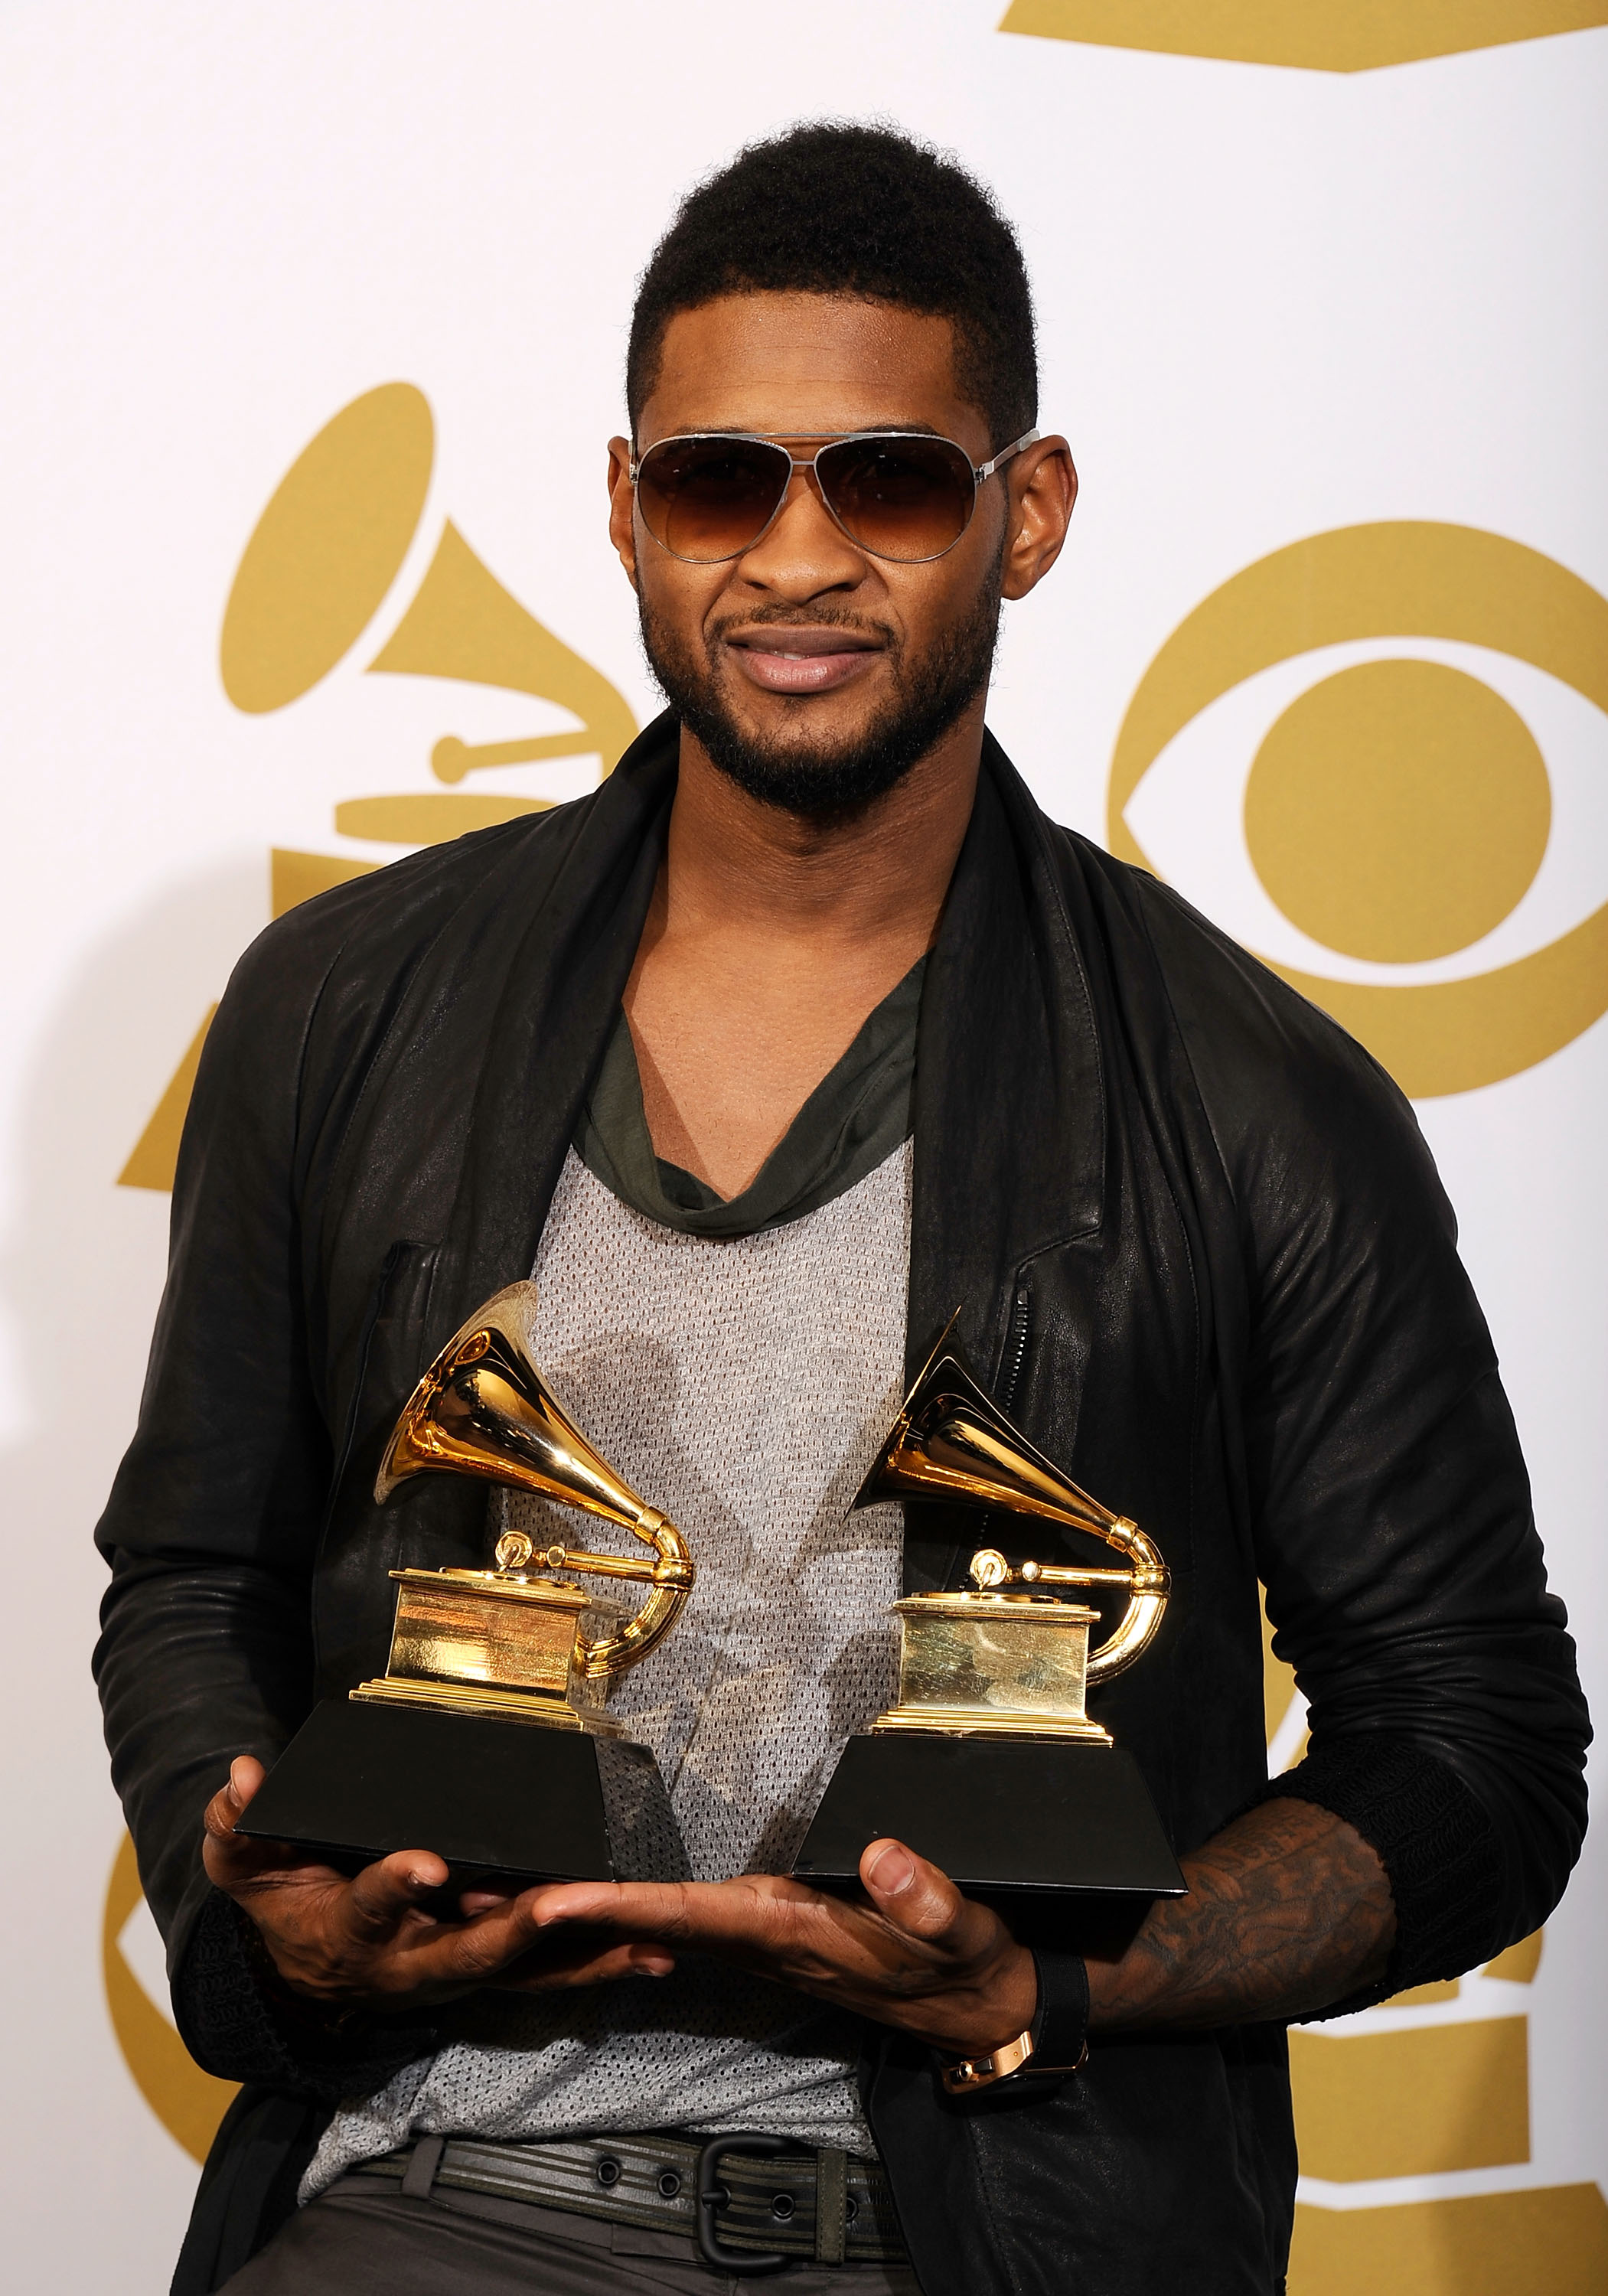 Usher poses in the press room at The 53rd Annual GRAMMY Awards on February 13, 2011 in Los Angeles, California | Source: Getty Images